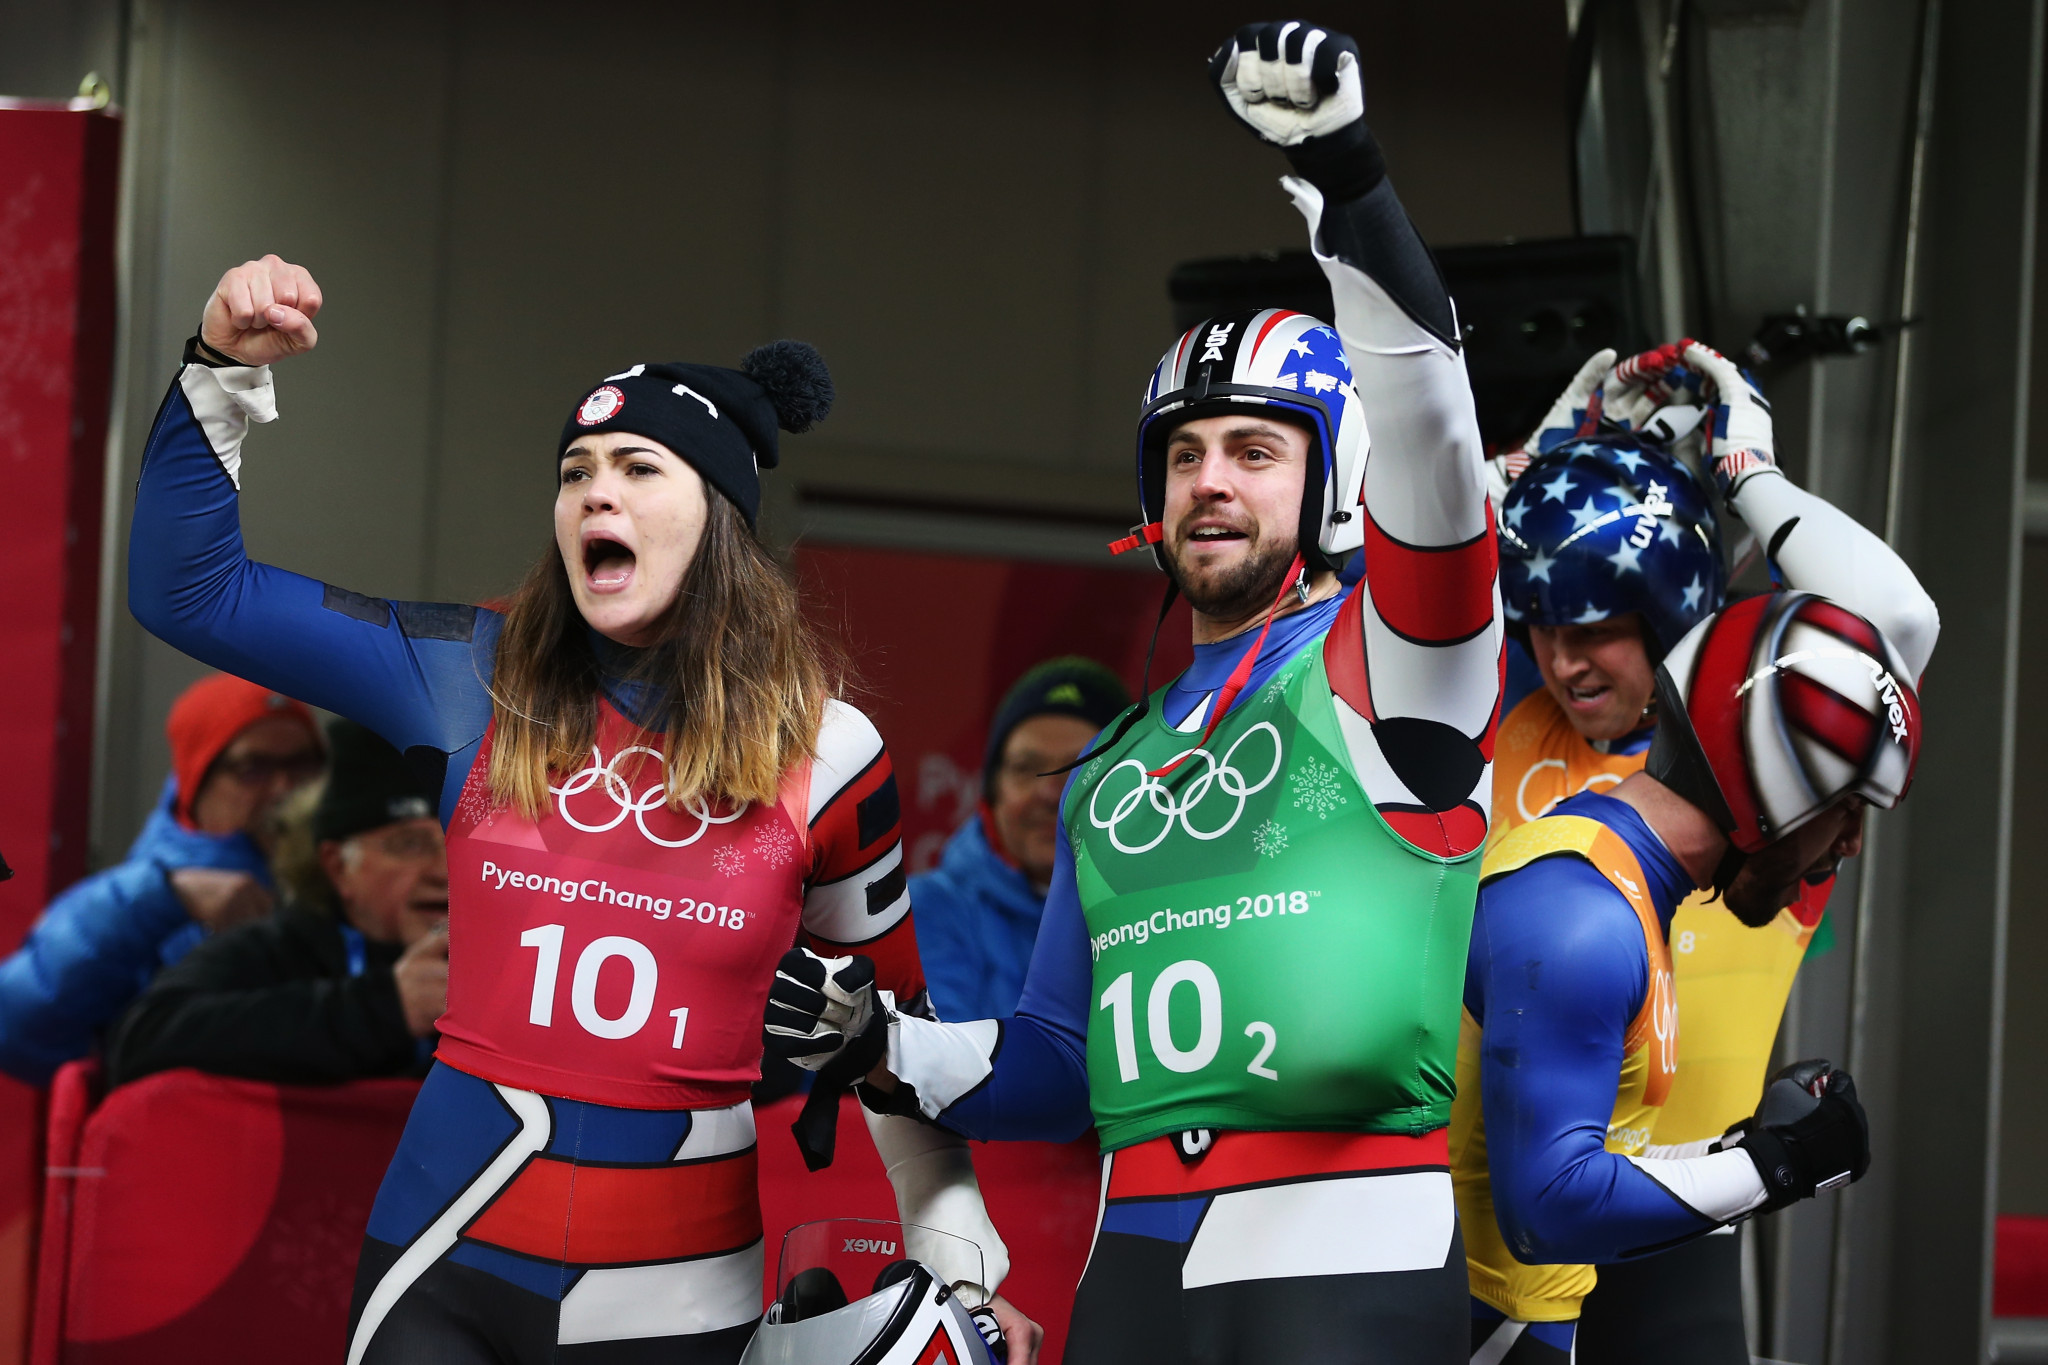 USA Luge raised funds for good causes away from the ice ©Getty Images